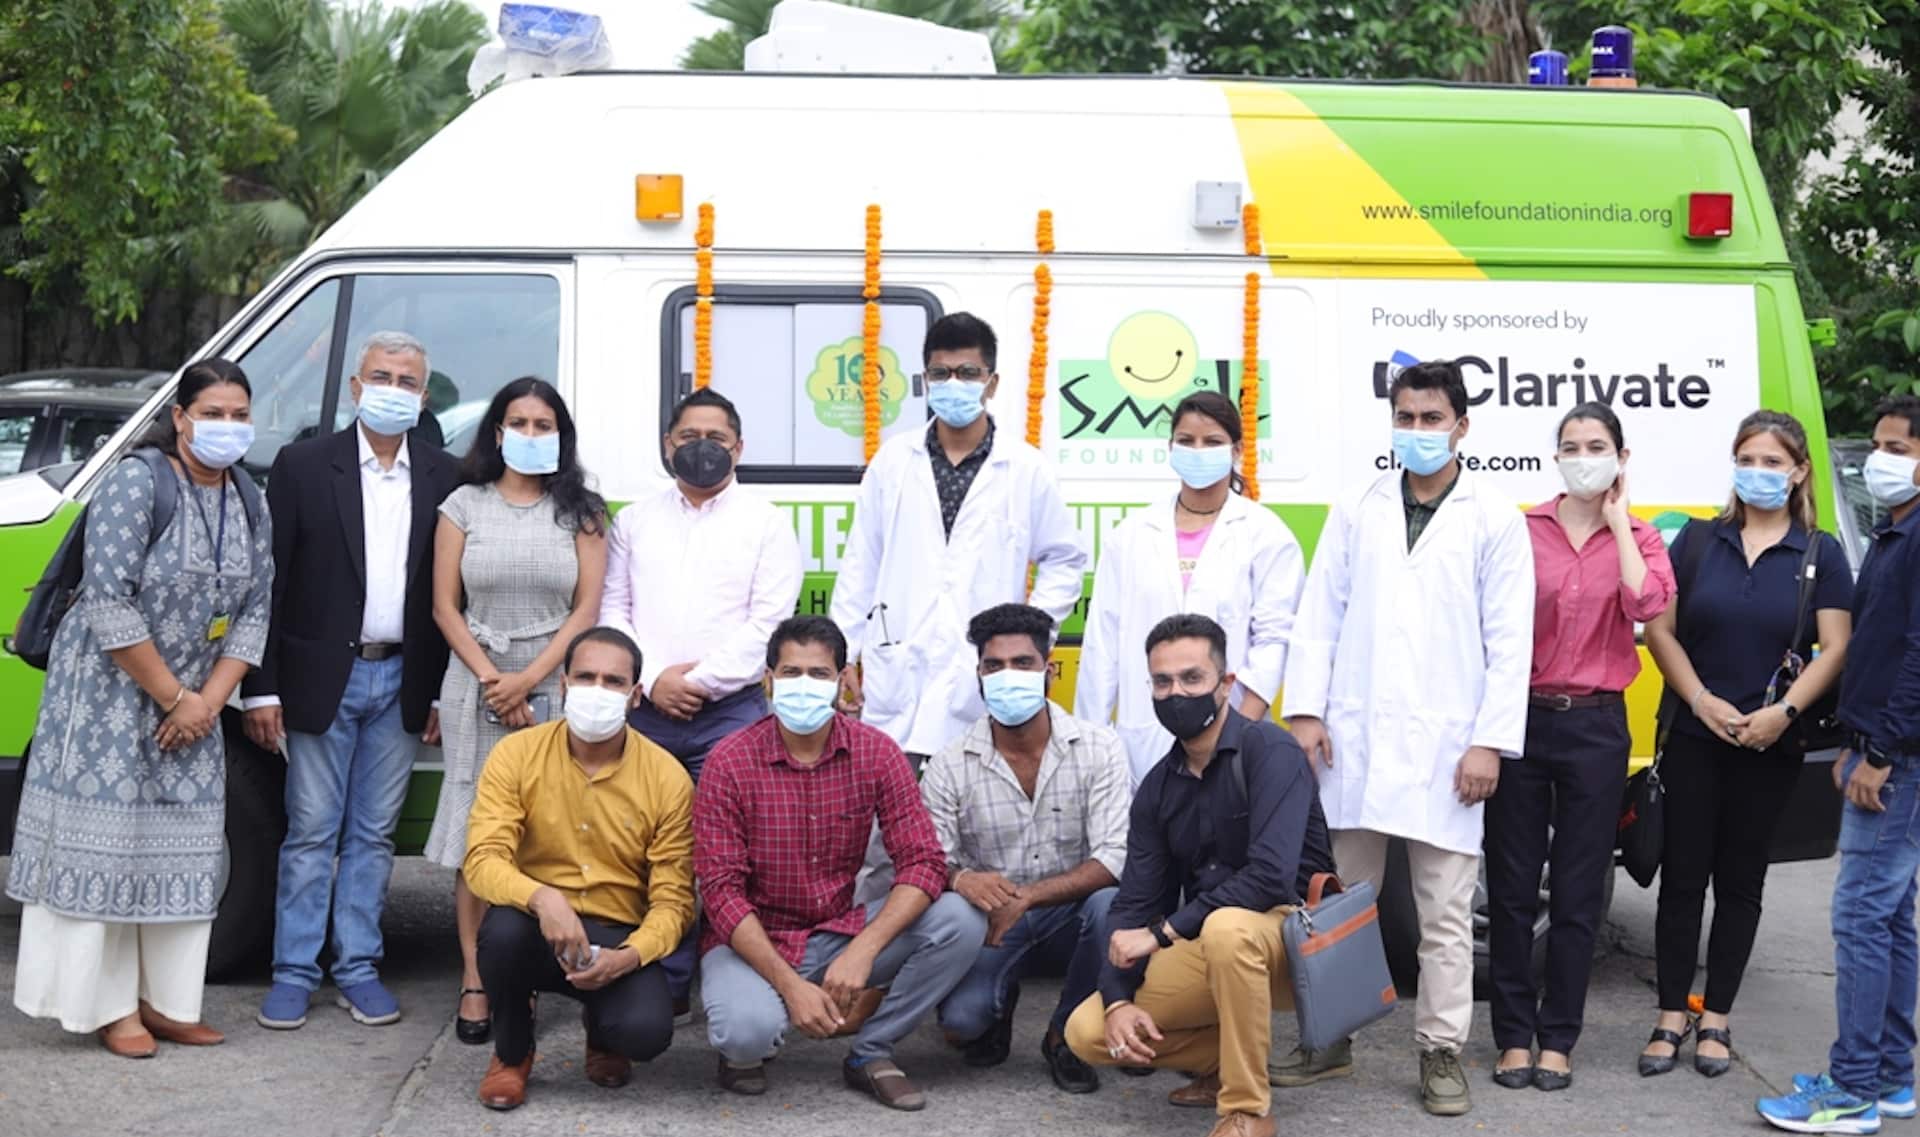 ‘Smile on Wheels’ unit find a home in Delhi though efforts of Clarivate